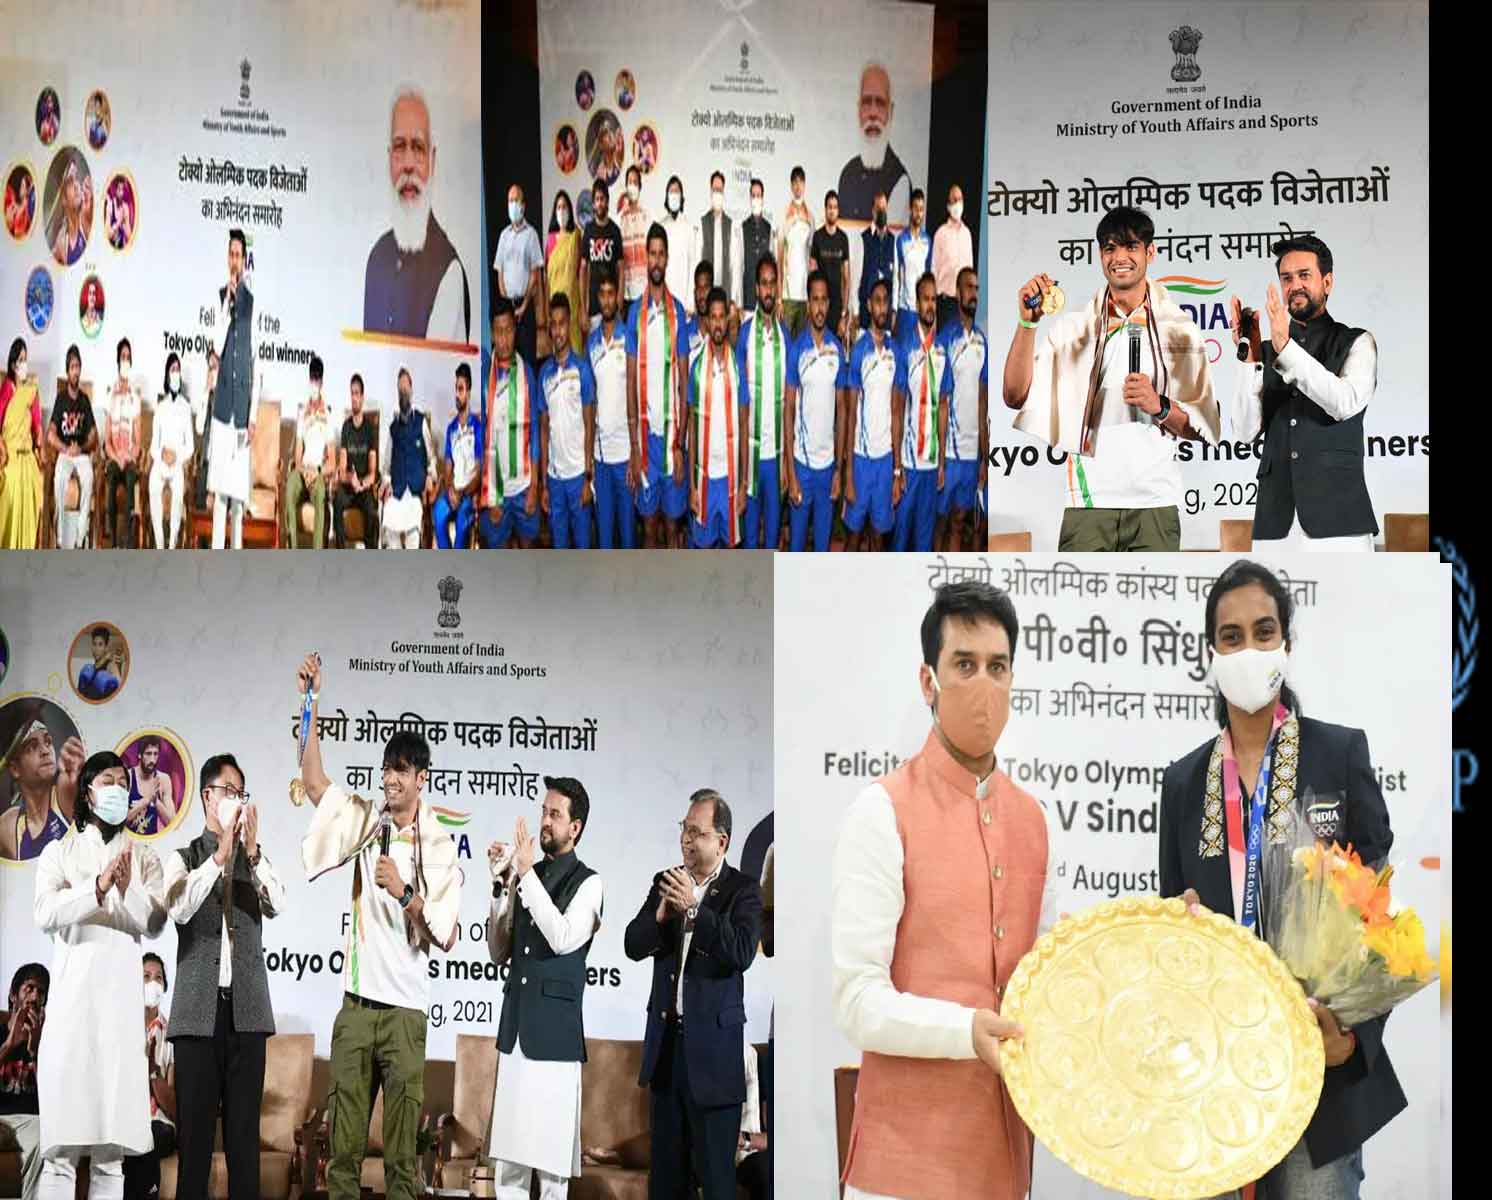 India’s Olympic Medalists receive Hero’s Welcome, Felicitated by Sports Minister Shri Anurag Thakur